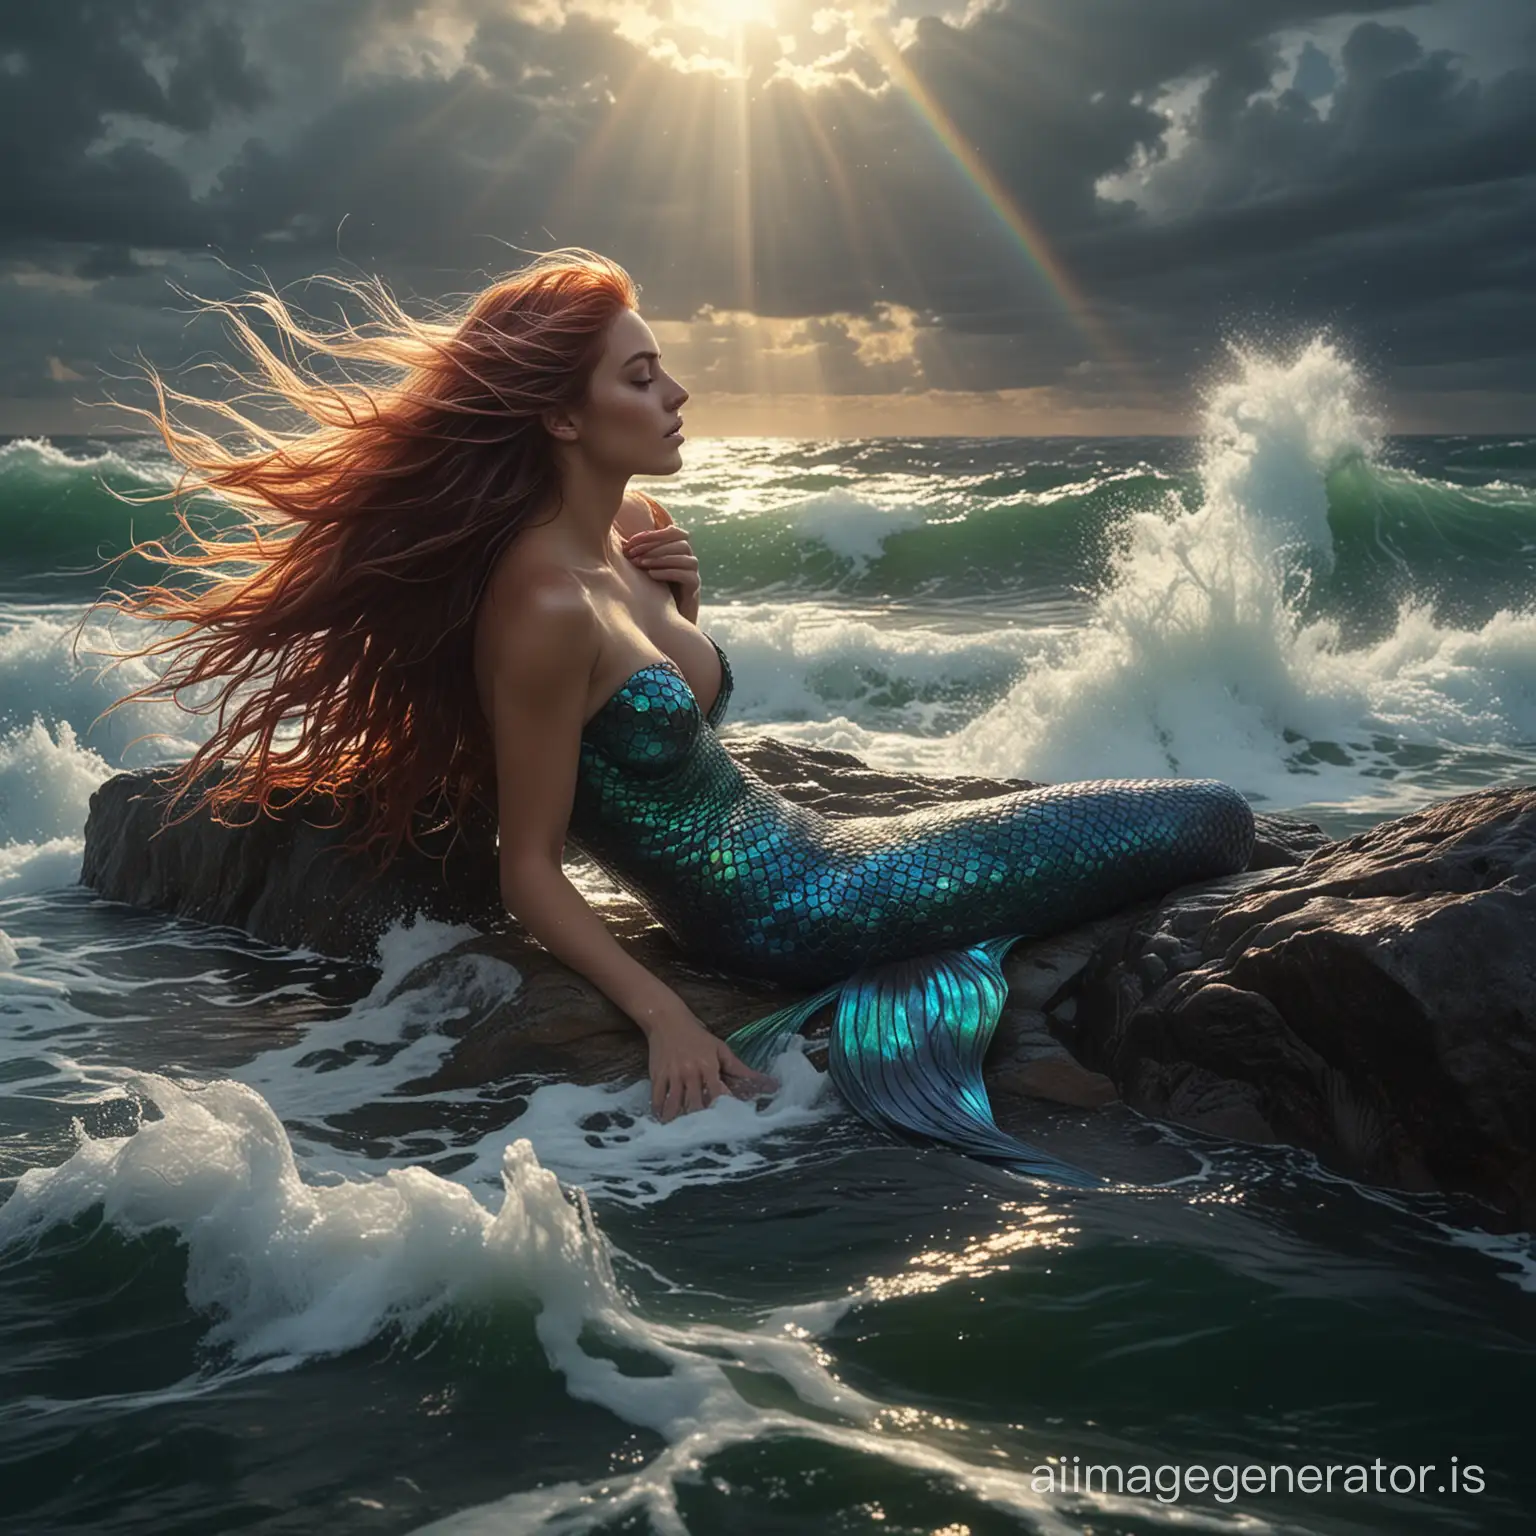 Mermaid resting on a sunlit rock amidst turbulent sea waves, FranckyXVWolff style, scales reflecting spectrum of iridescent hues, tendrils of hair flowing with the water's movement, surrounded by a shimmering aura, backdrop of stormy skies clearing above, high-definition 6k resolution, ultra-clear, dramatic lighting.